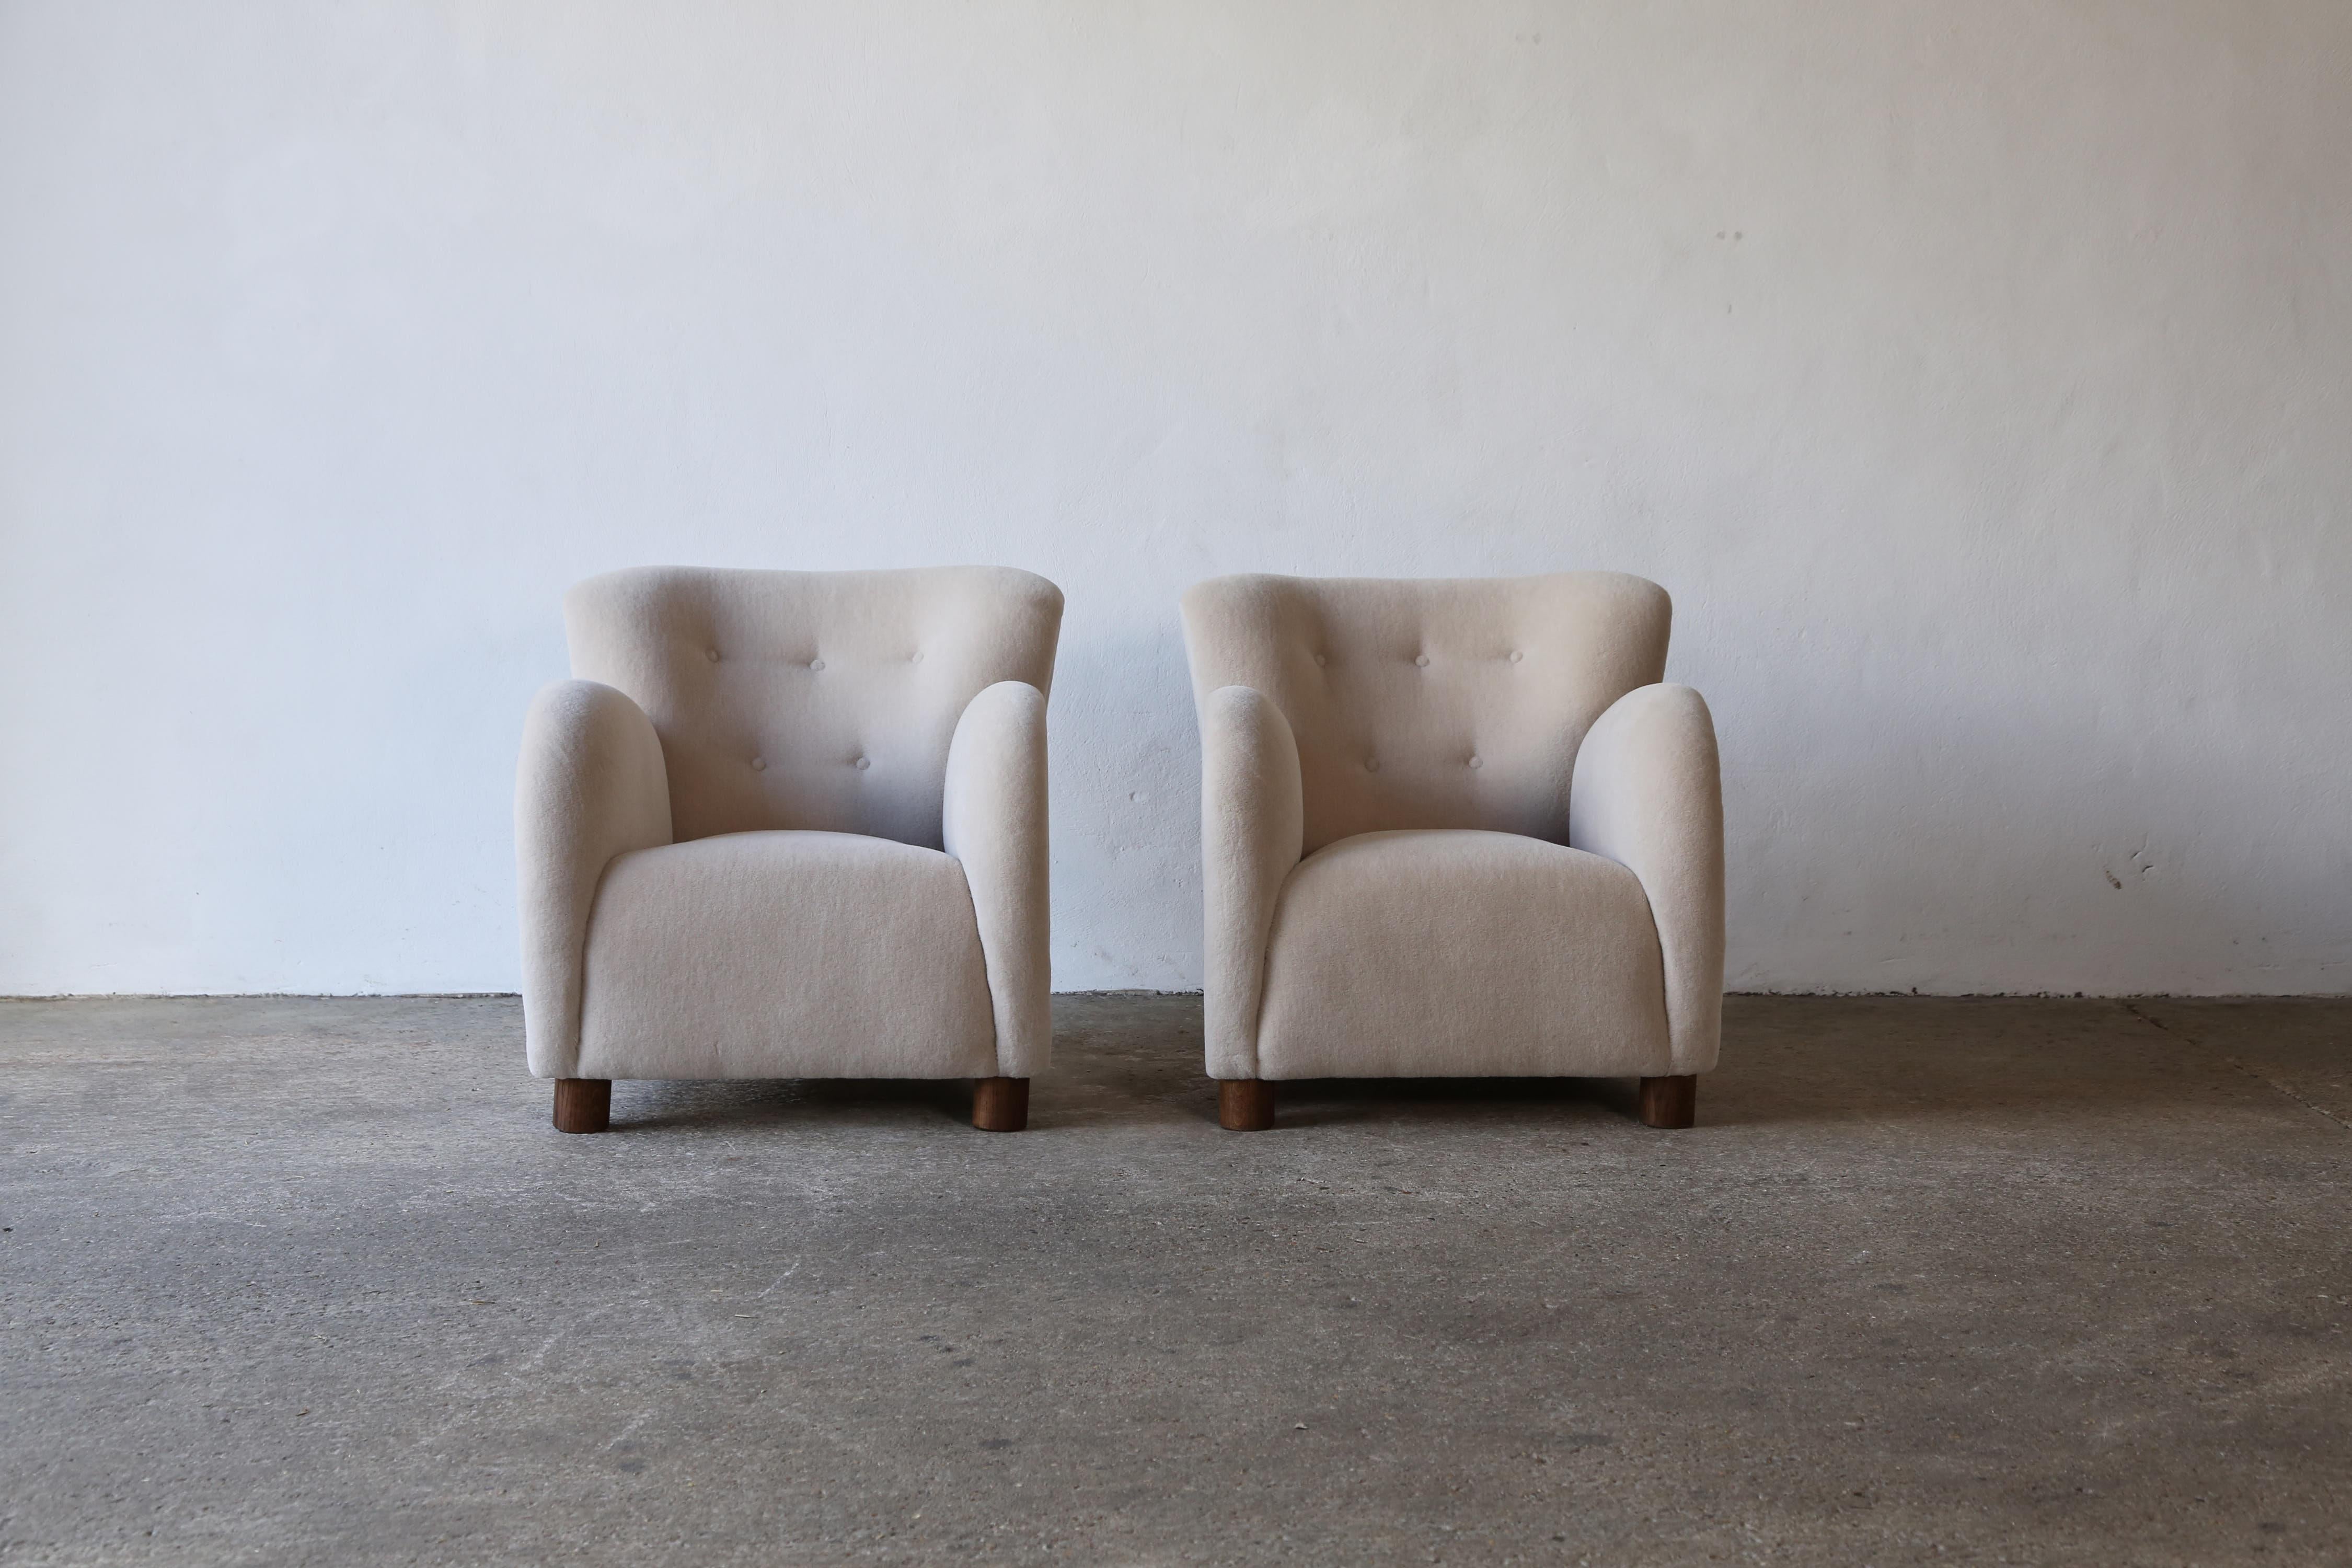 A superb pair of modern round arm 1940s Danish style armchairs. Handmade beech frames and sprung seats.  Newly upholstered in a premium, soft, pure alpaca wool fabric with solid oak feet. Fast shipping worldwide.


